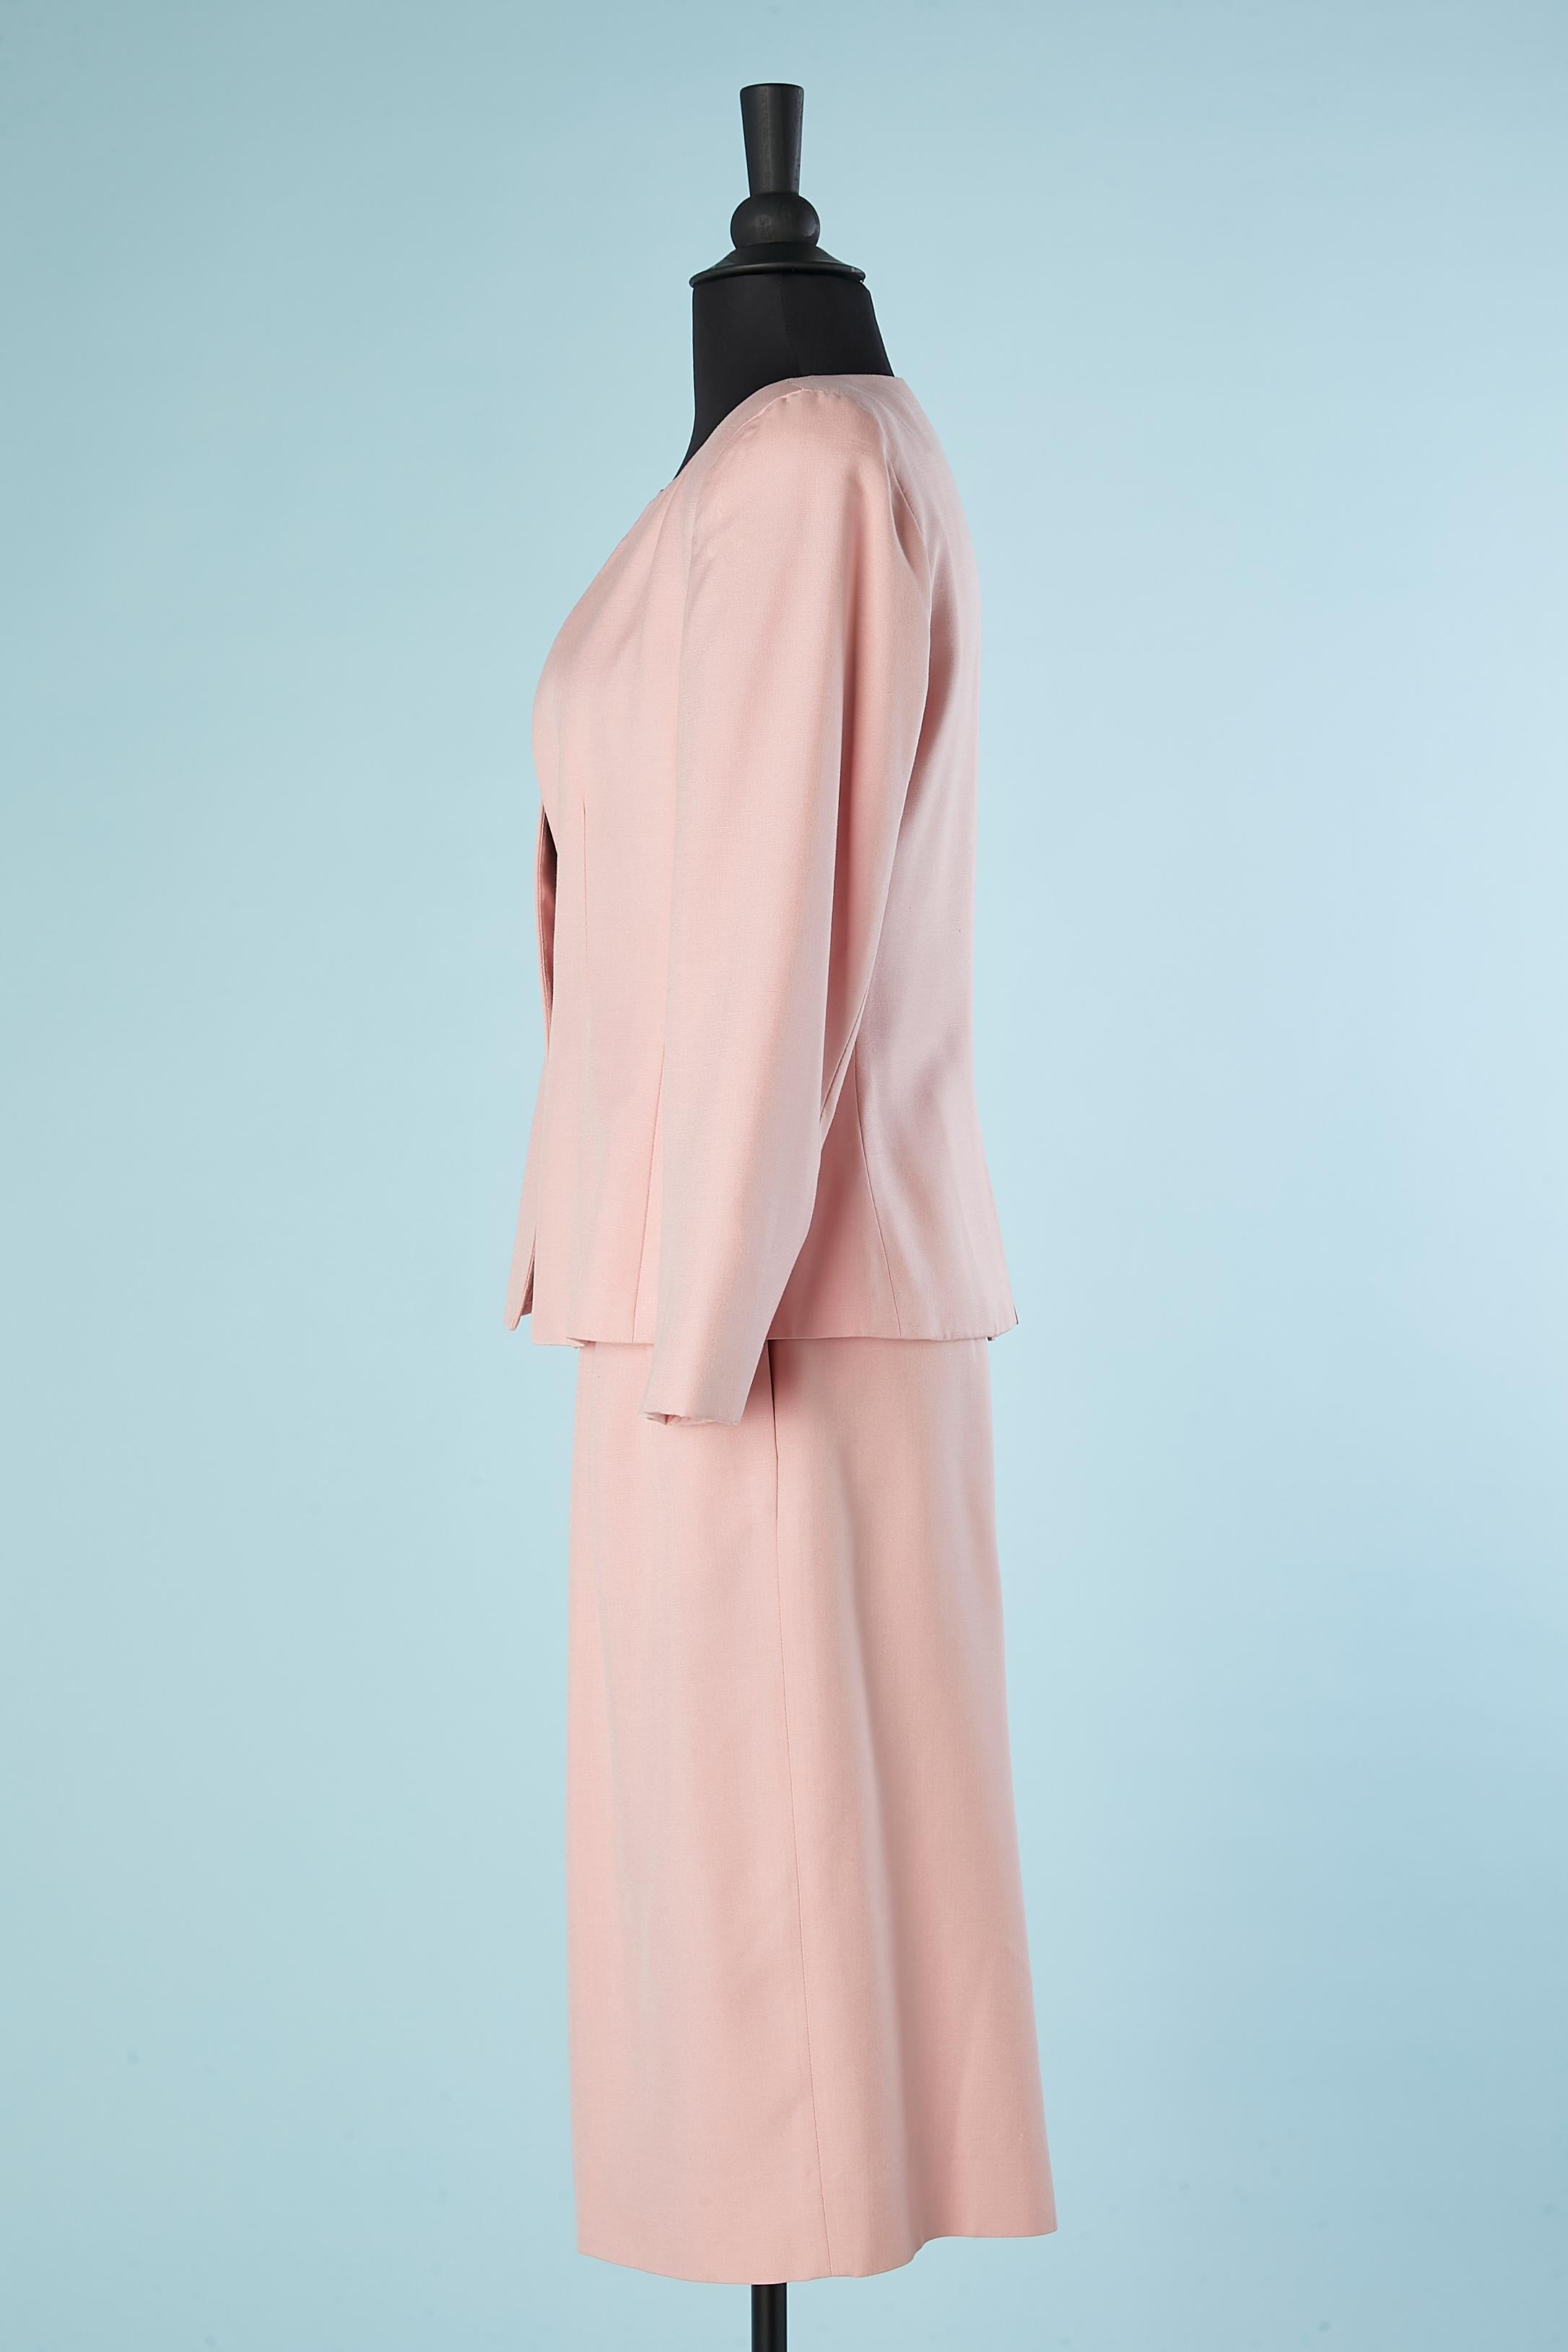 Pink skirt-suit with mother-of-shell button Christian Dior Suit 